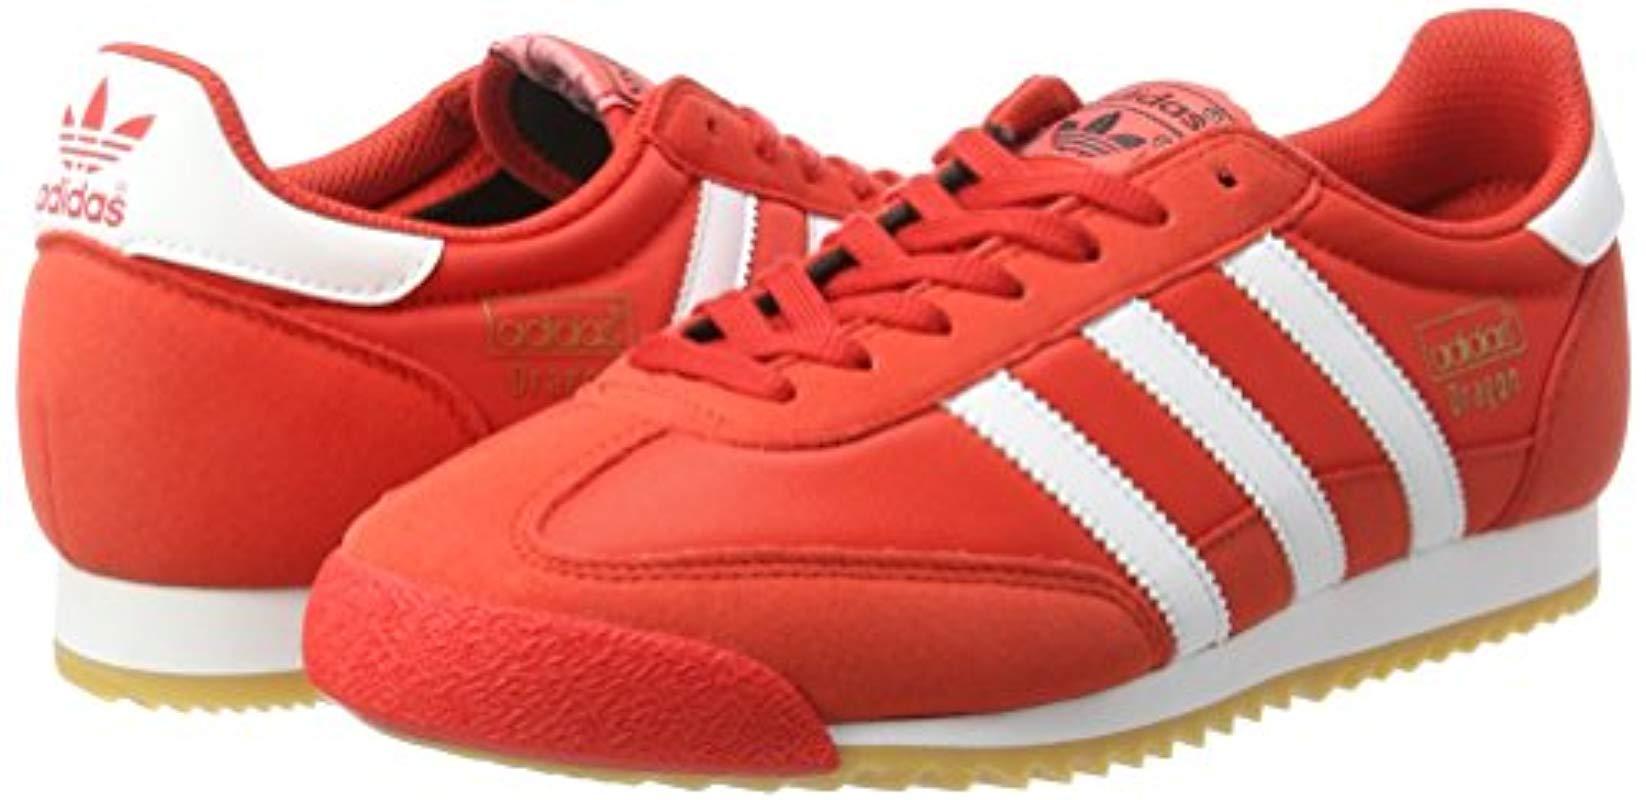 adidas dragon red, hot sale Hit A 68% Discount - statehouse.gov.sl